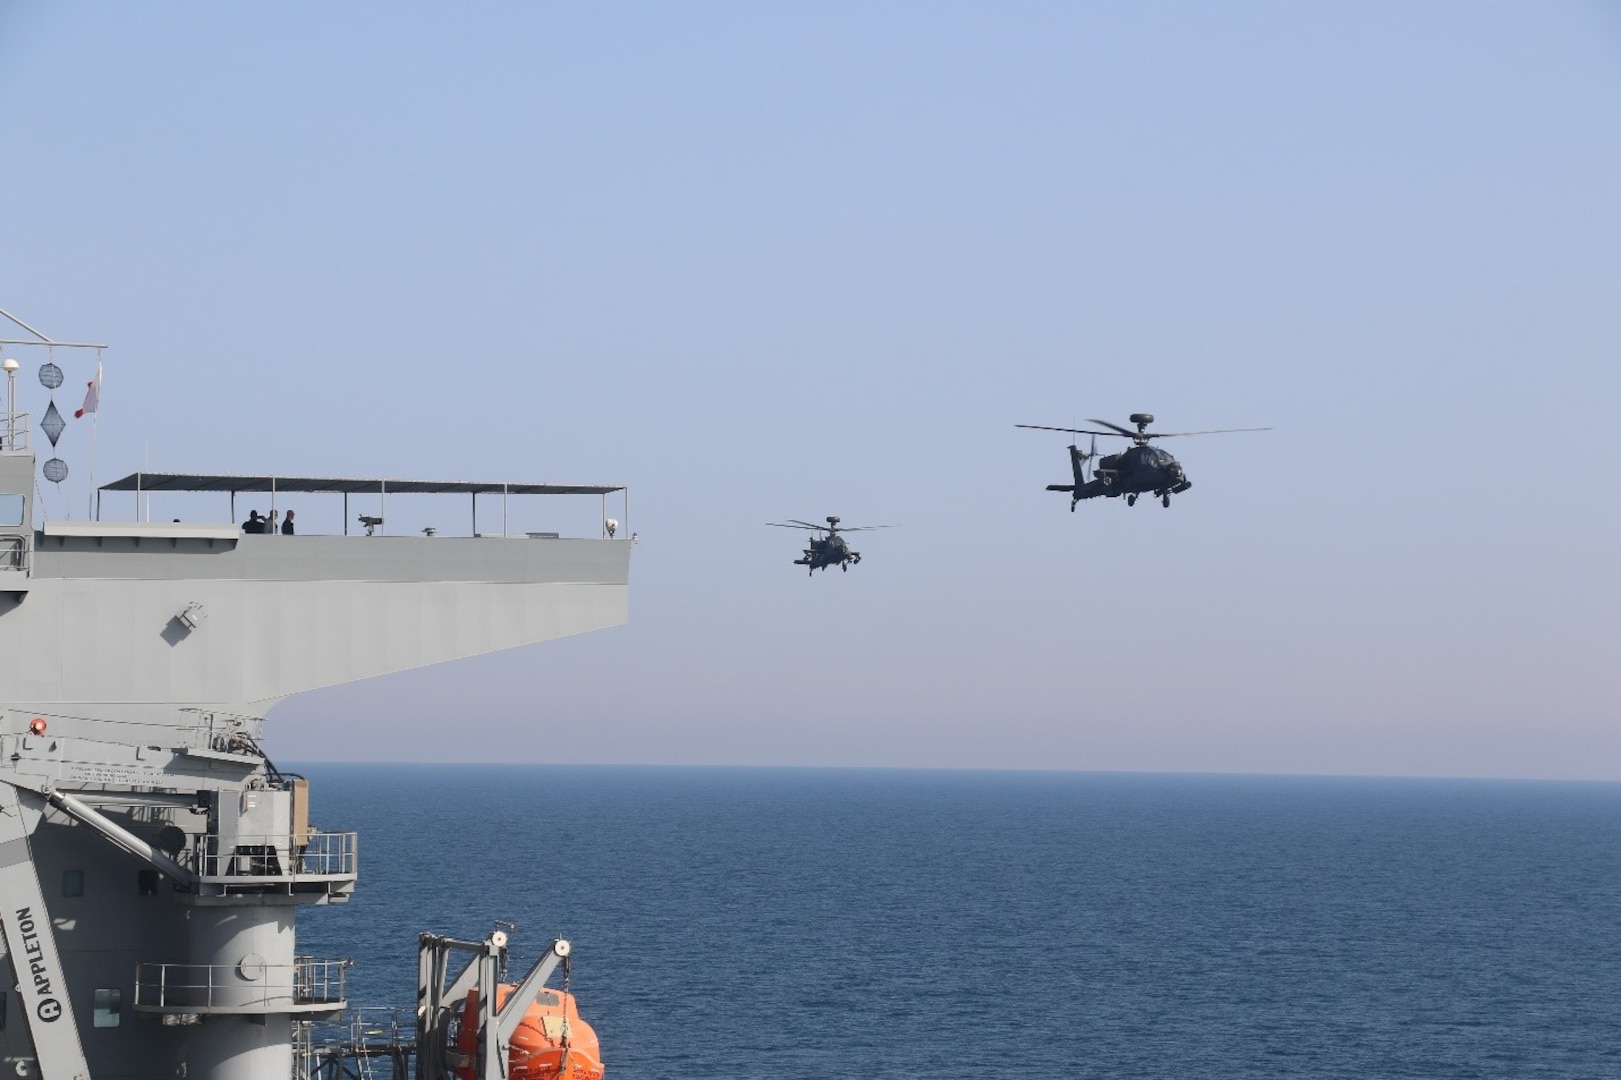 ARABIAN GULF (Feb. 22, 2023) Two United Arab Emirates Armed Forces AH-64D Long Bow Apaches conduct deck landing qualifications aboard expeditionary sea base USS Lewis B. Puller (ESB 3) in the Arabian Gulf, Feb. 22, 2023. Puller is deployed to the U.S. 5th Fleet area of operations to help ensure maritime security and stability in the Middle East region.